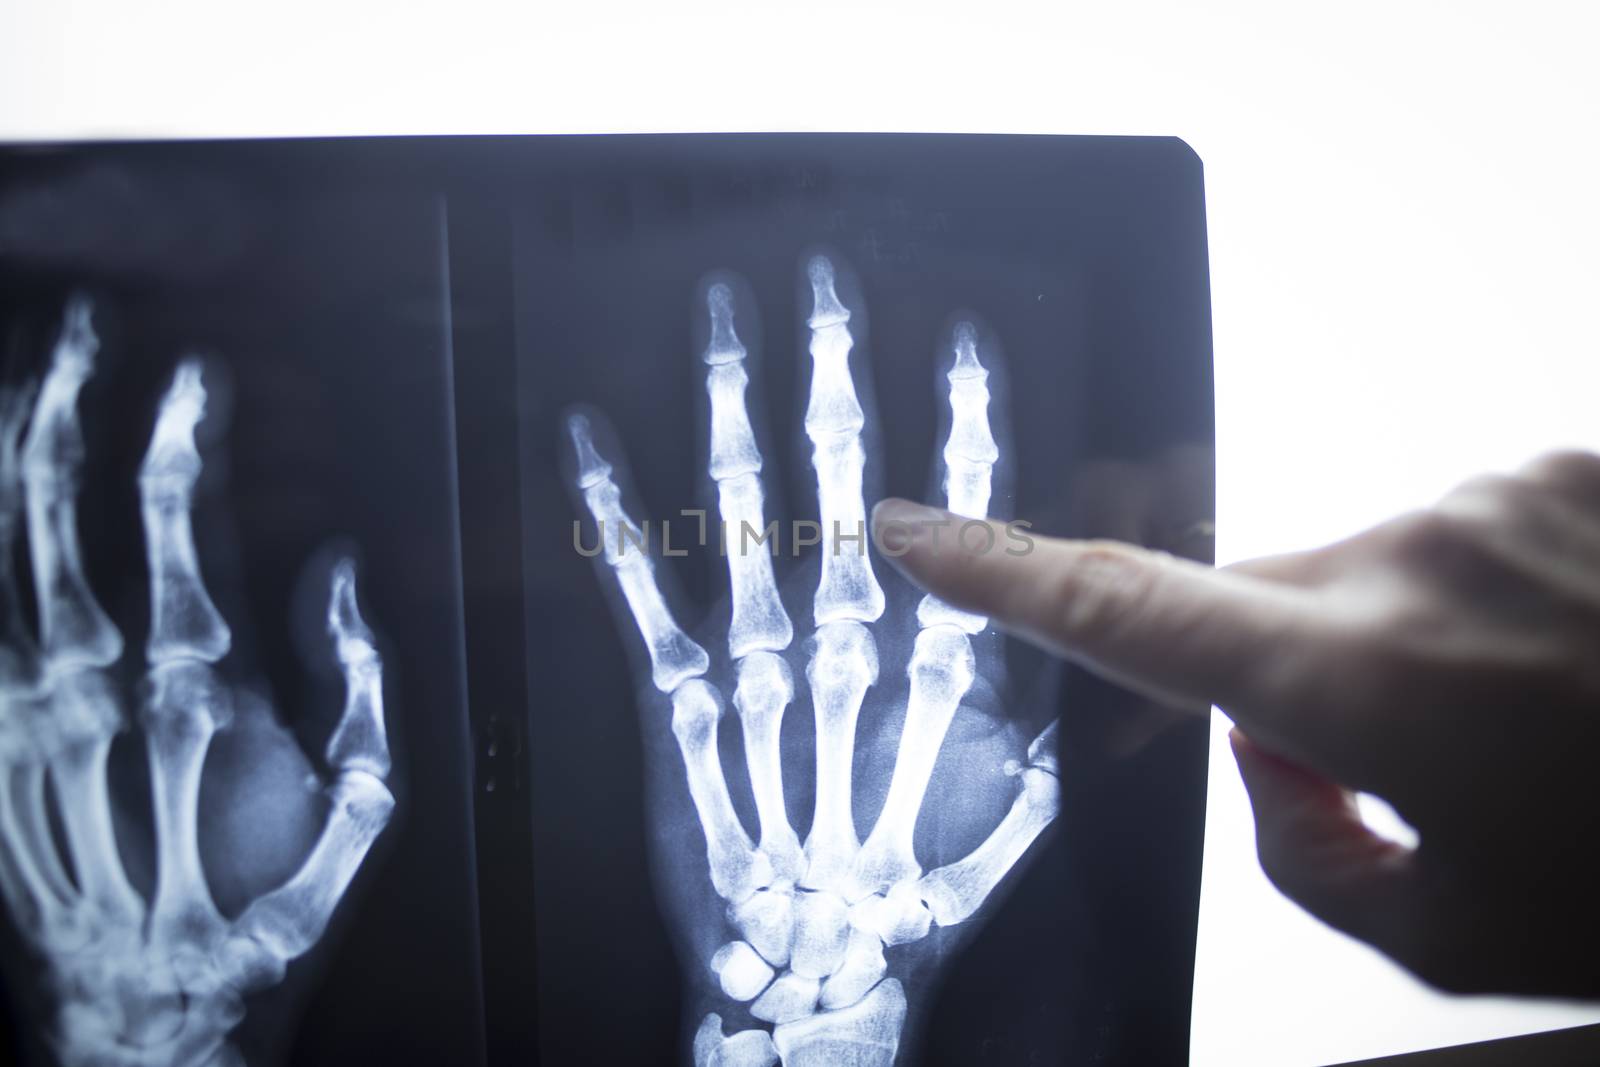 Female medical doctor pointing with finger at radiograph x-ray image on viewing light screen monitor showing hand of patient in scan.